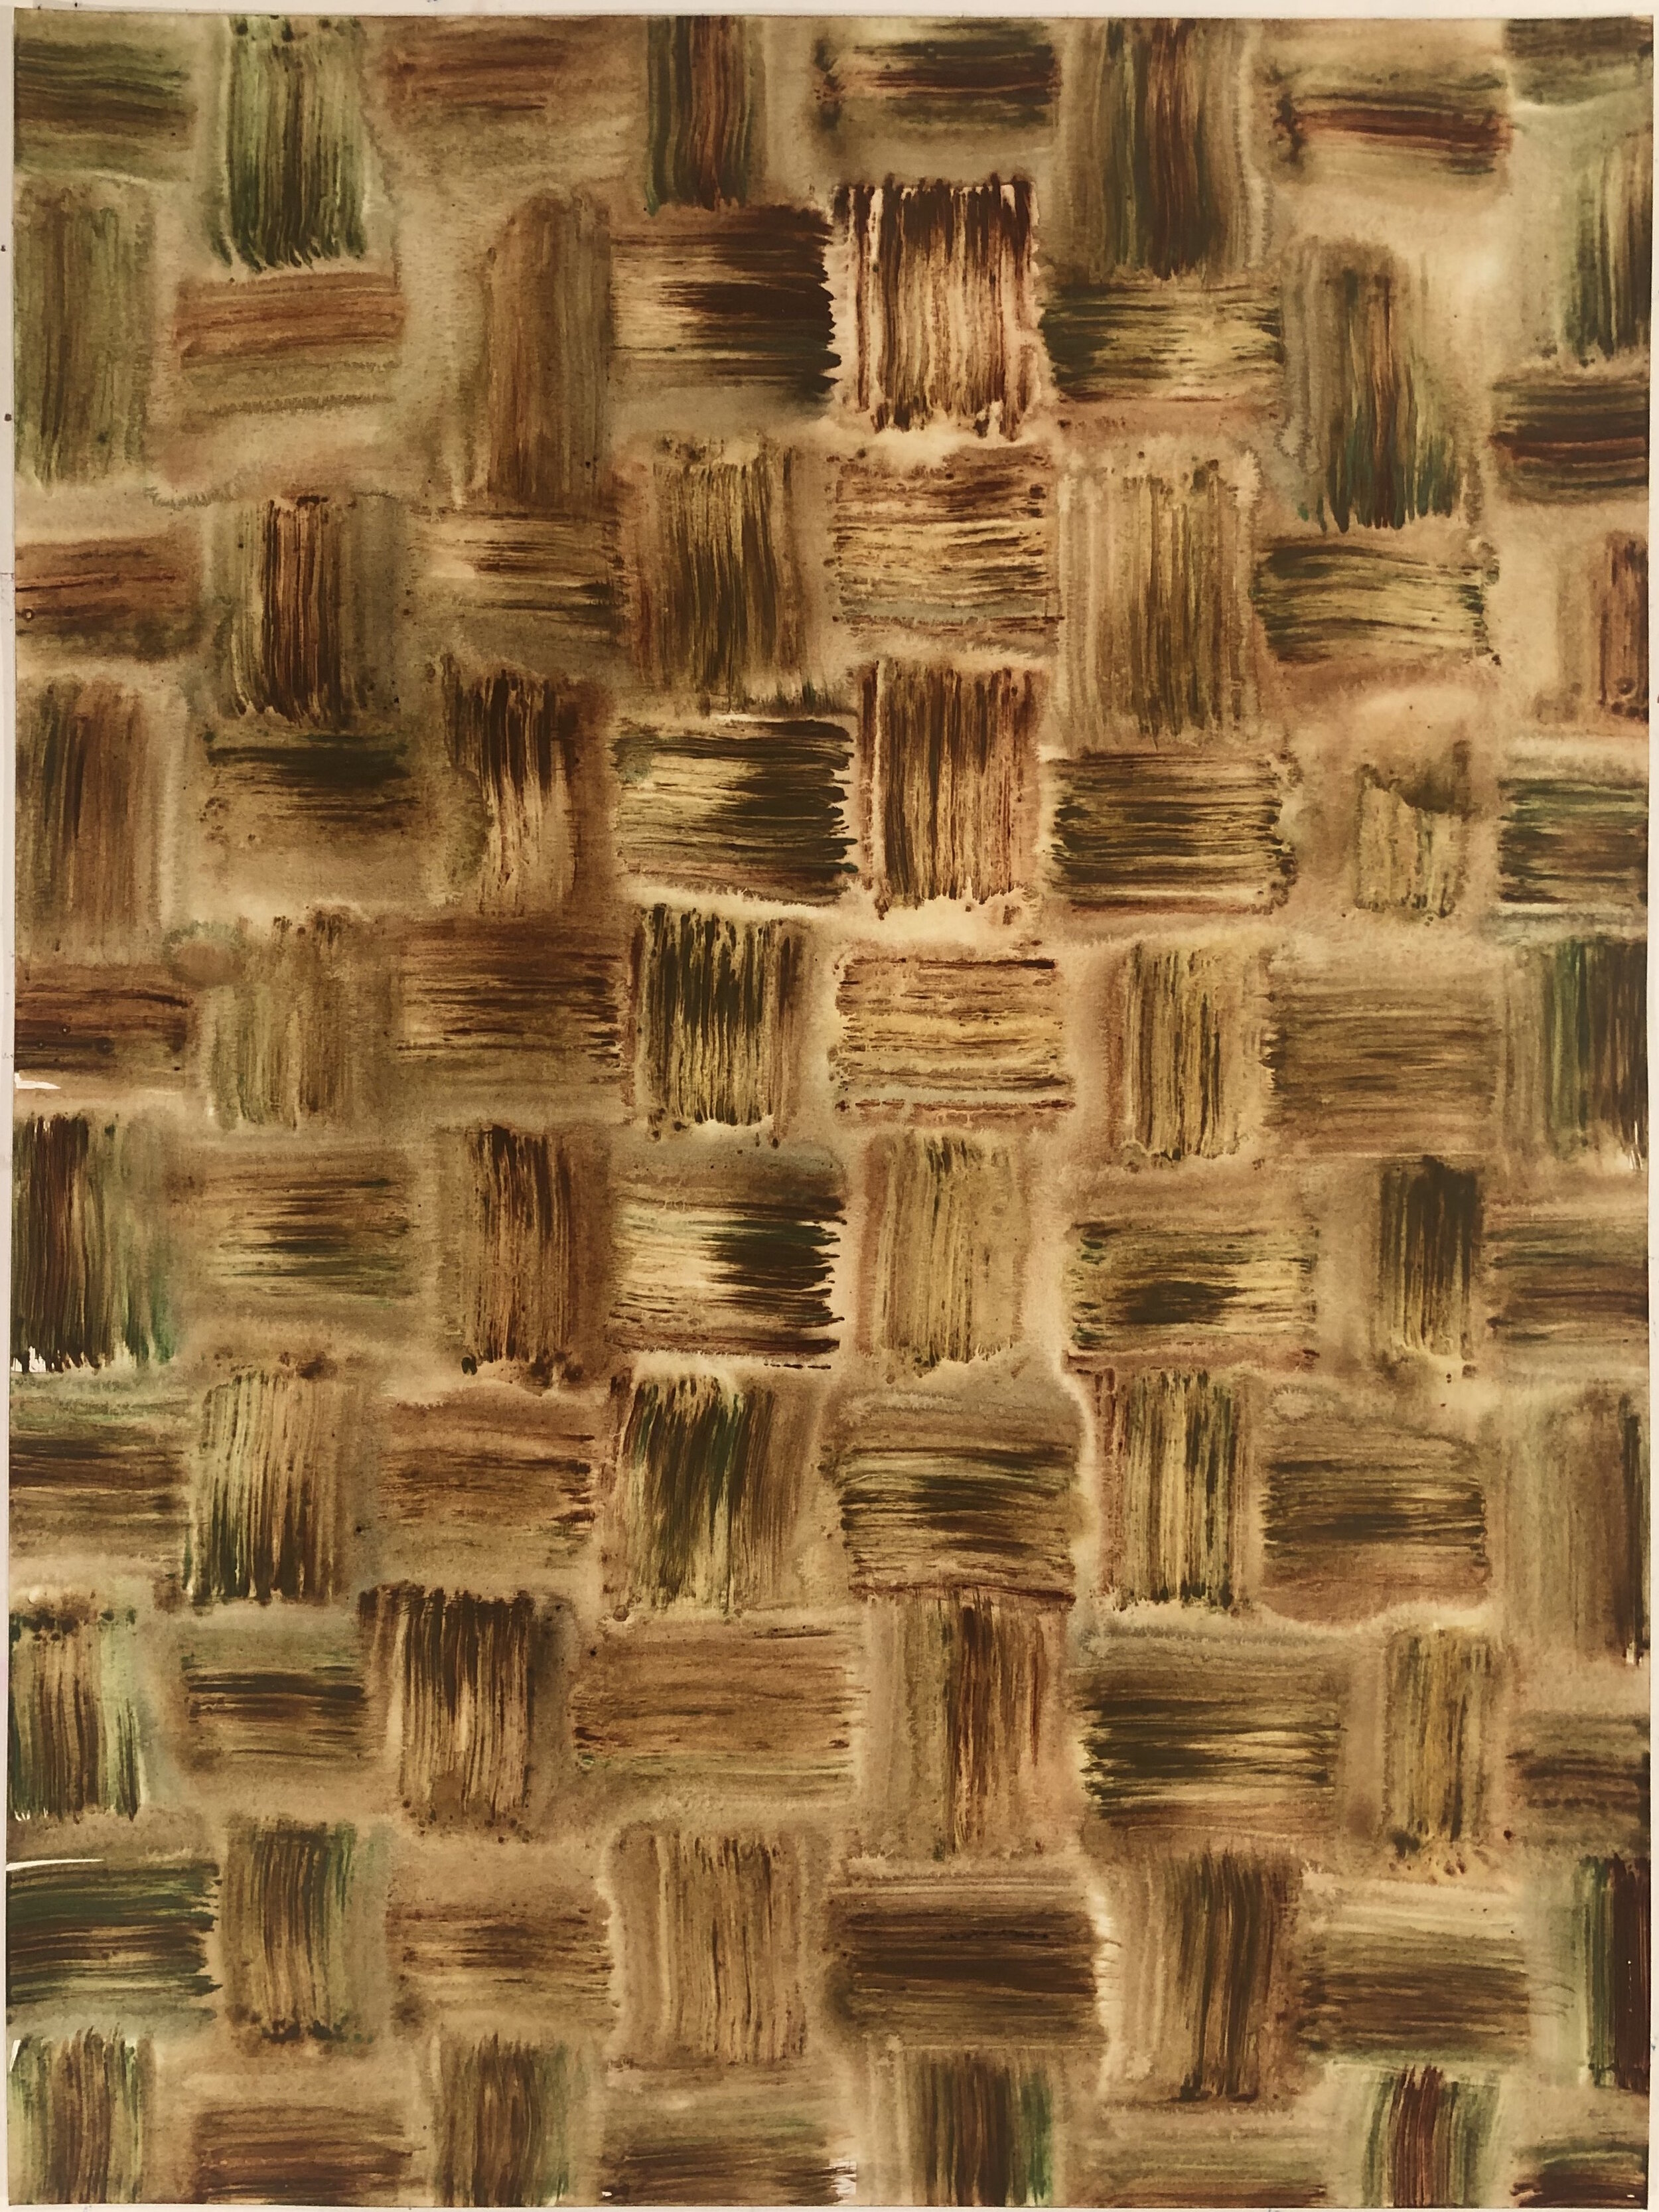 Abstract Woven Sienna, 2021